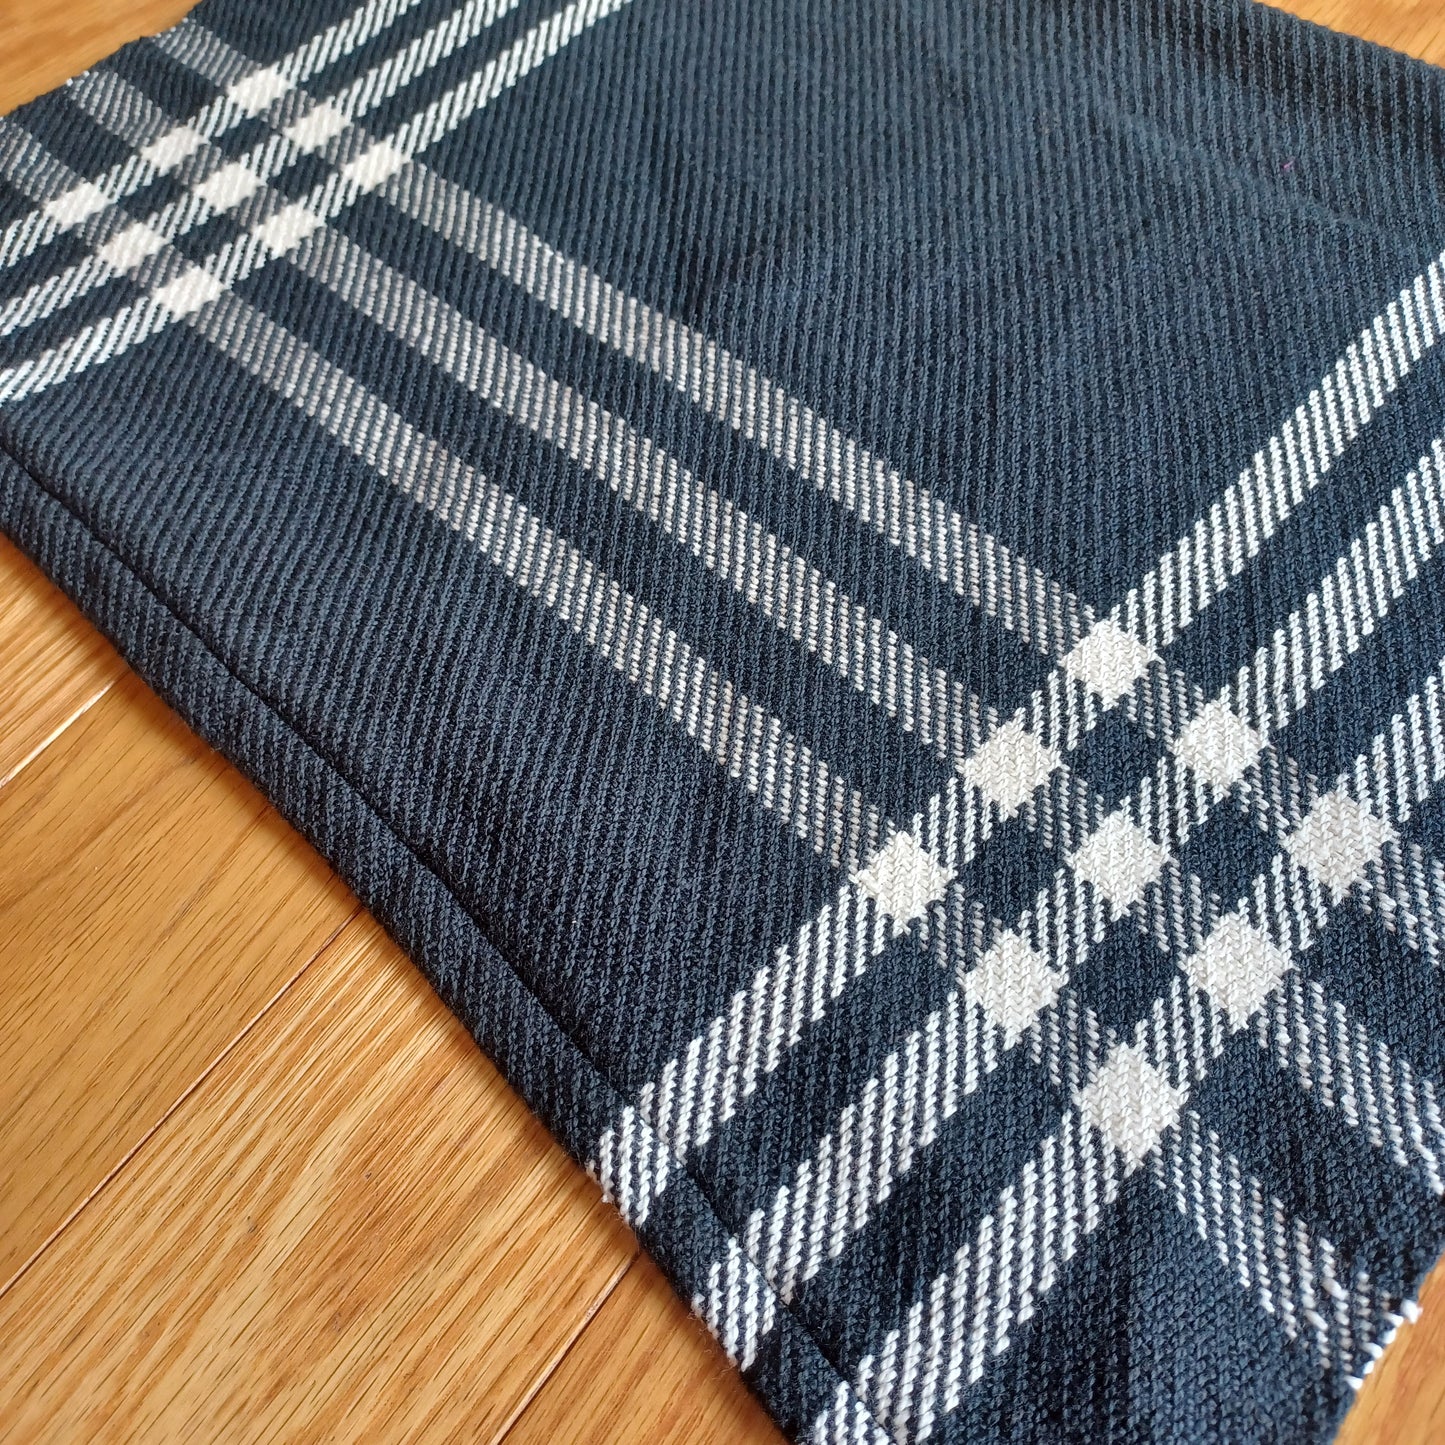 Twill-Check , Black and White Dish Towel